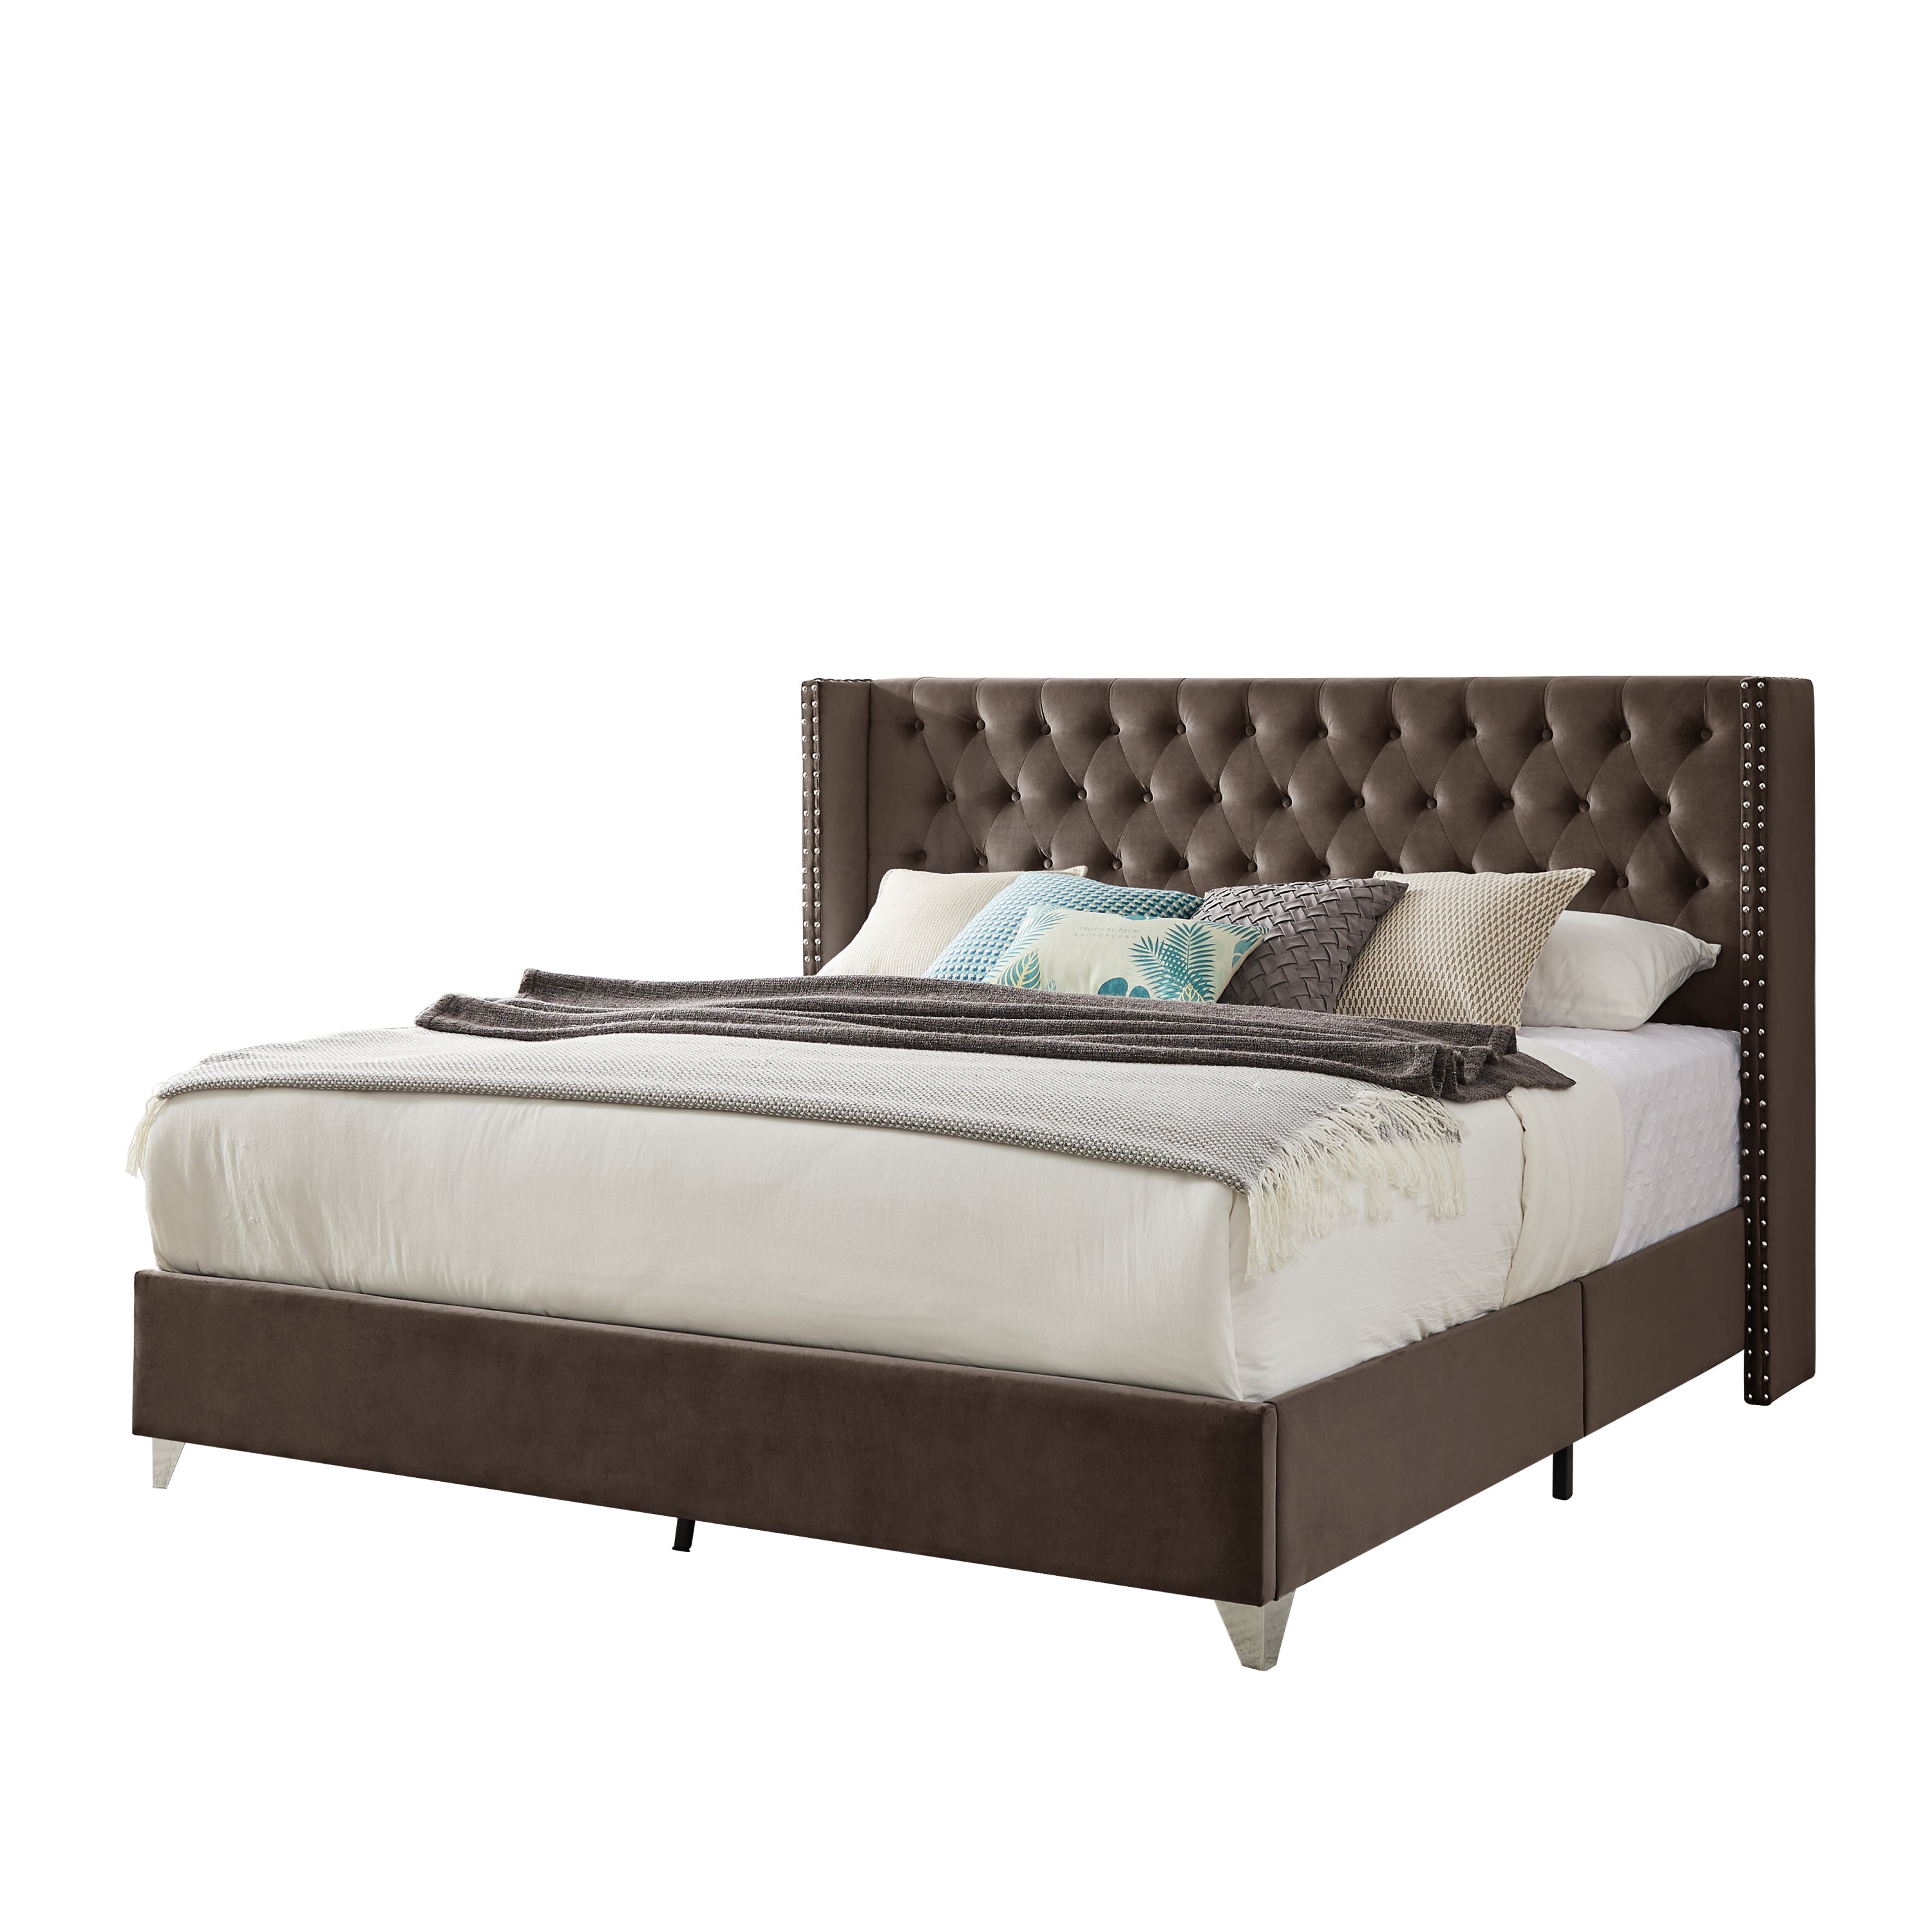 King Bed Button Designed Headboard - Brown